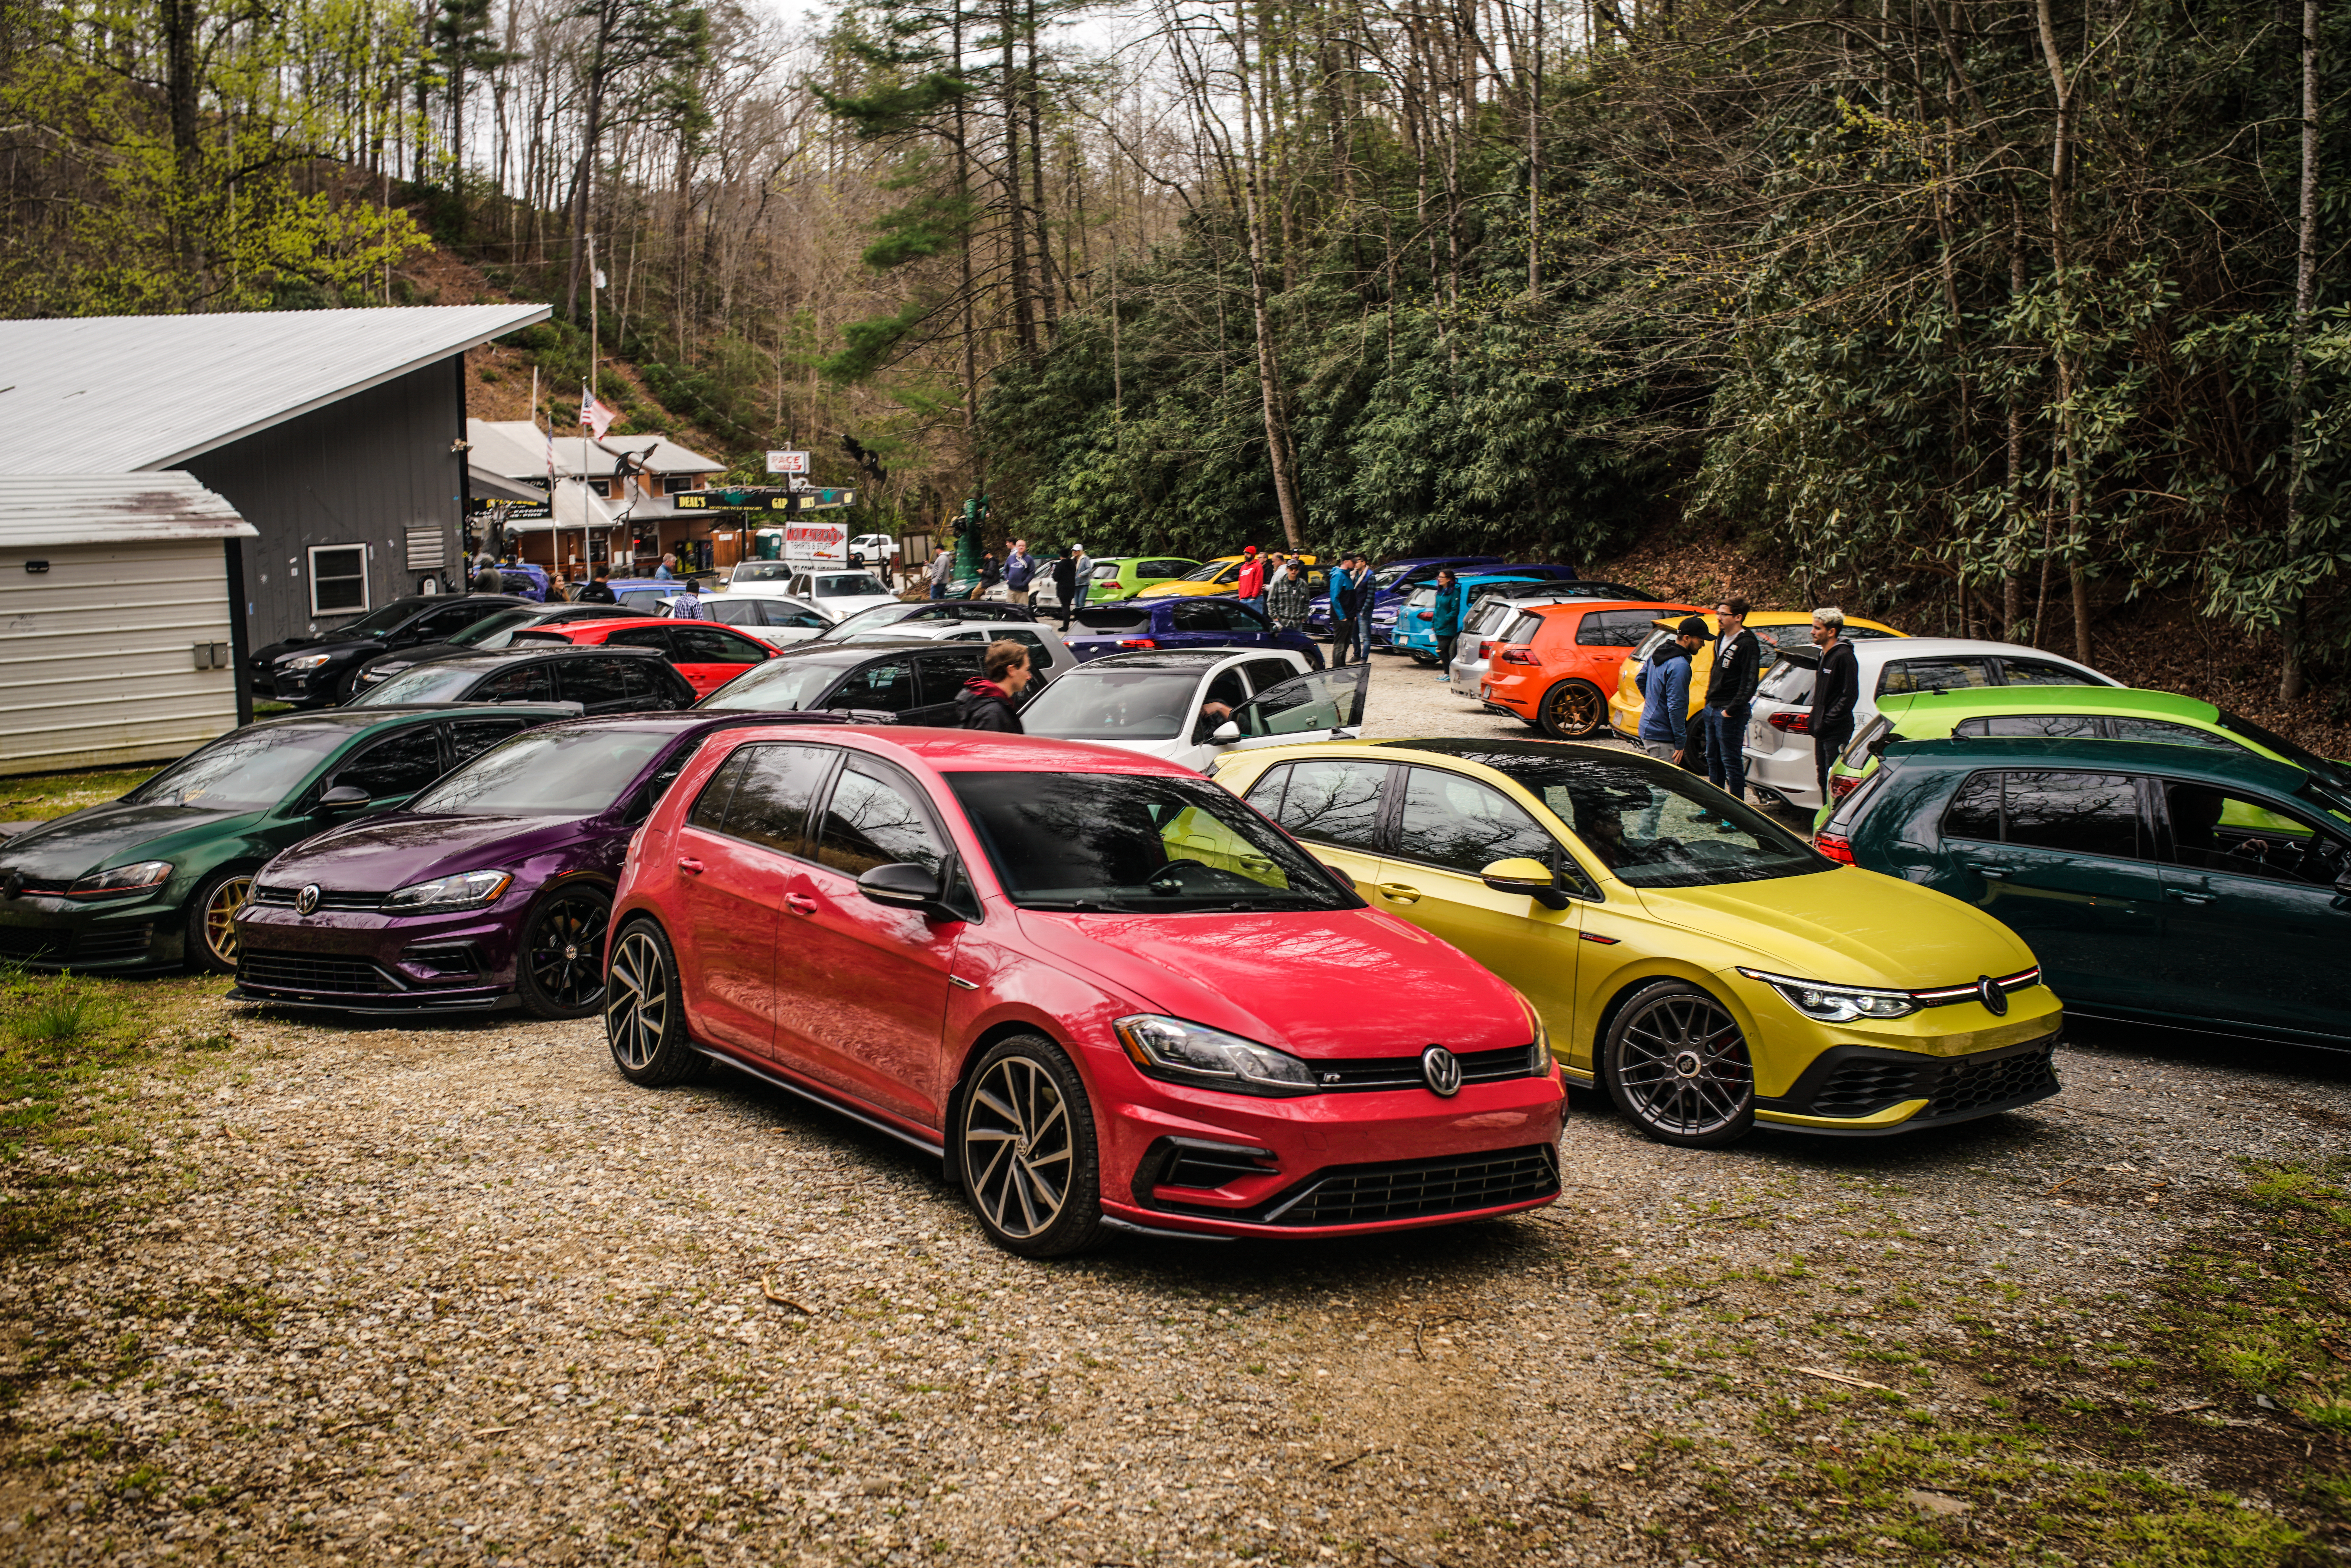 Wookies in the Woods ’22 – S3 Magazine Coverage